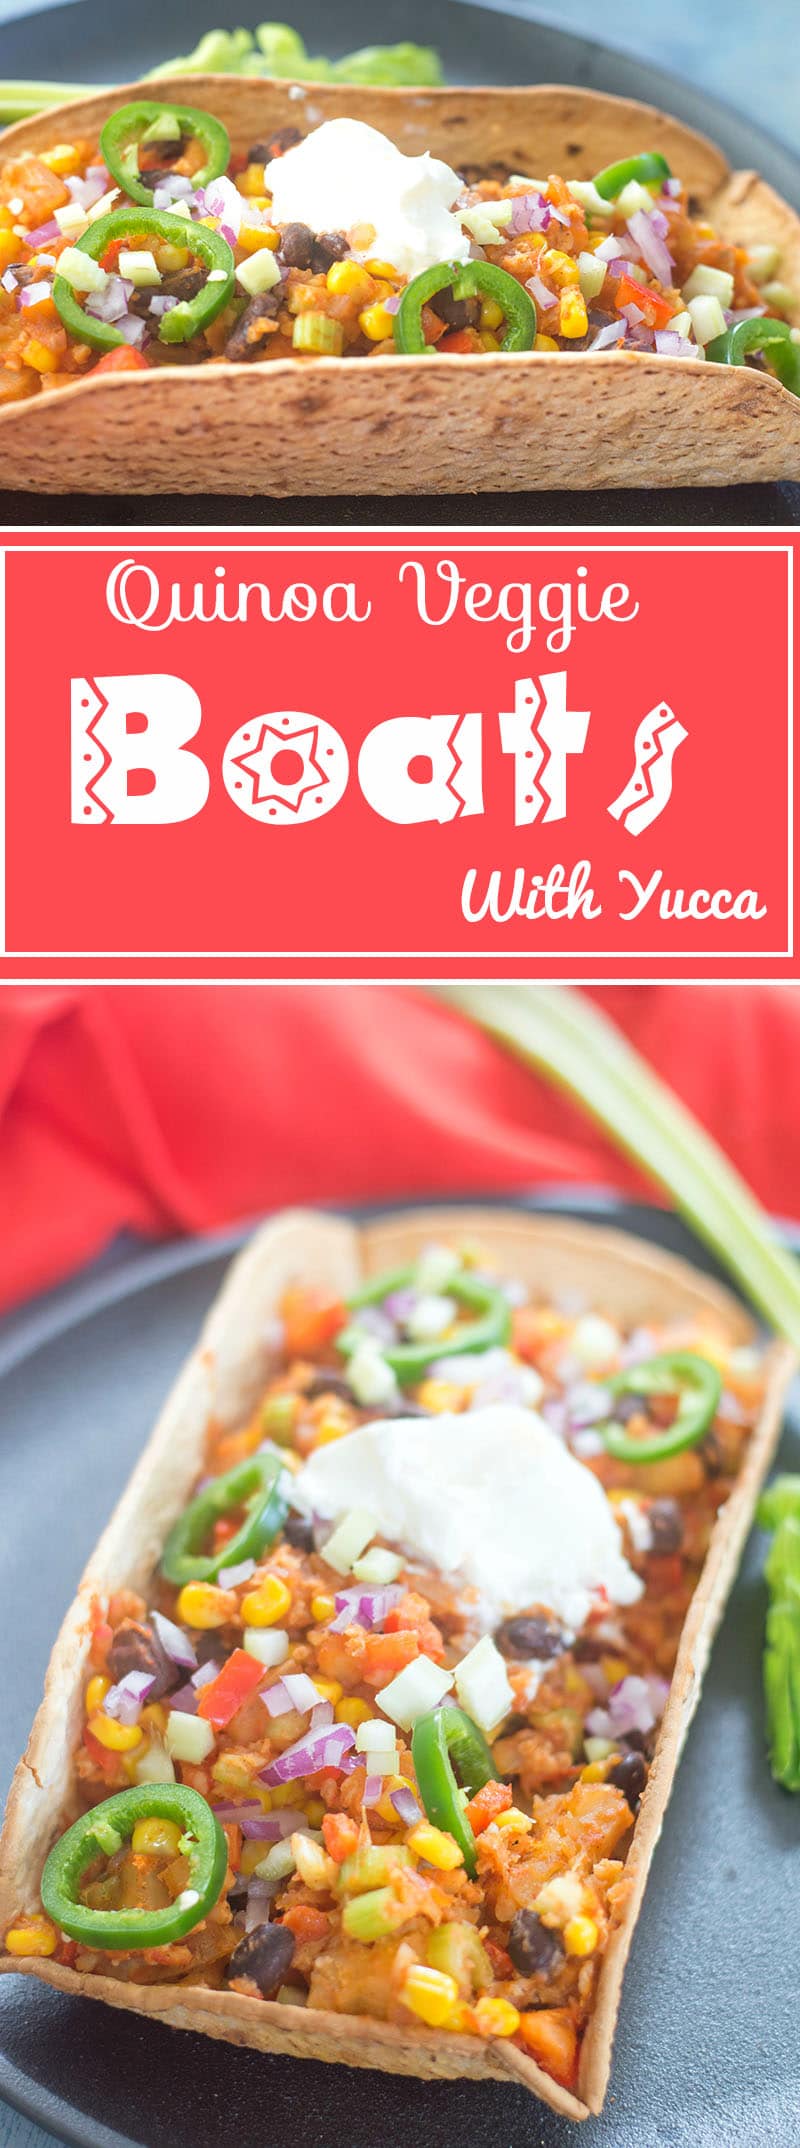 Quinoa veggie boats made with fresh veggies and Yucca. This is street food that food trucks would love to serve. Very easy to make and eat.